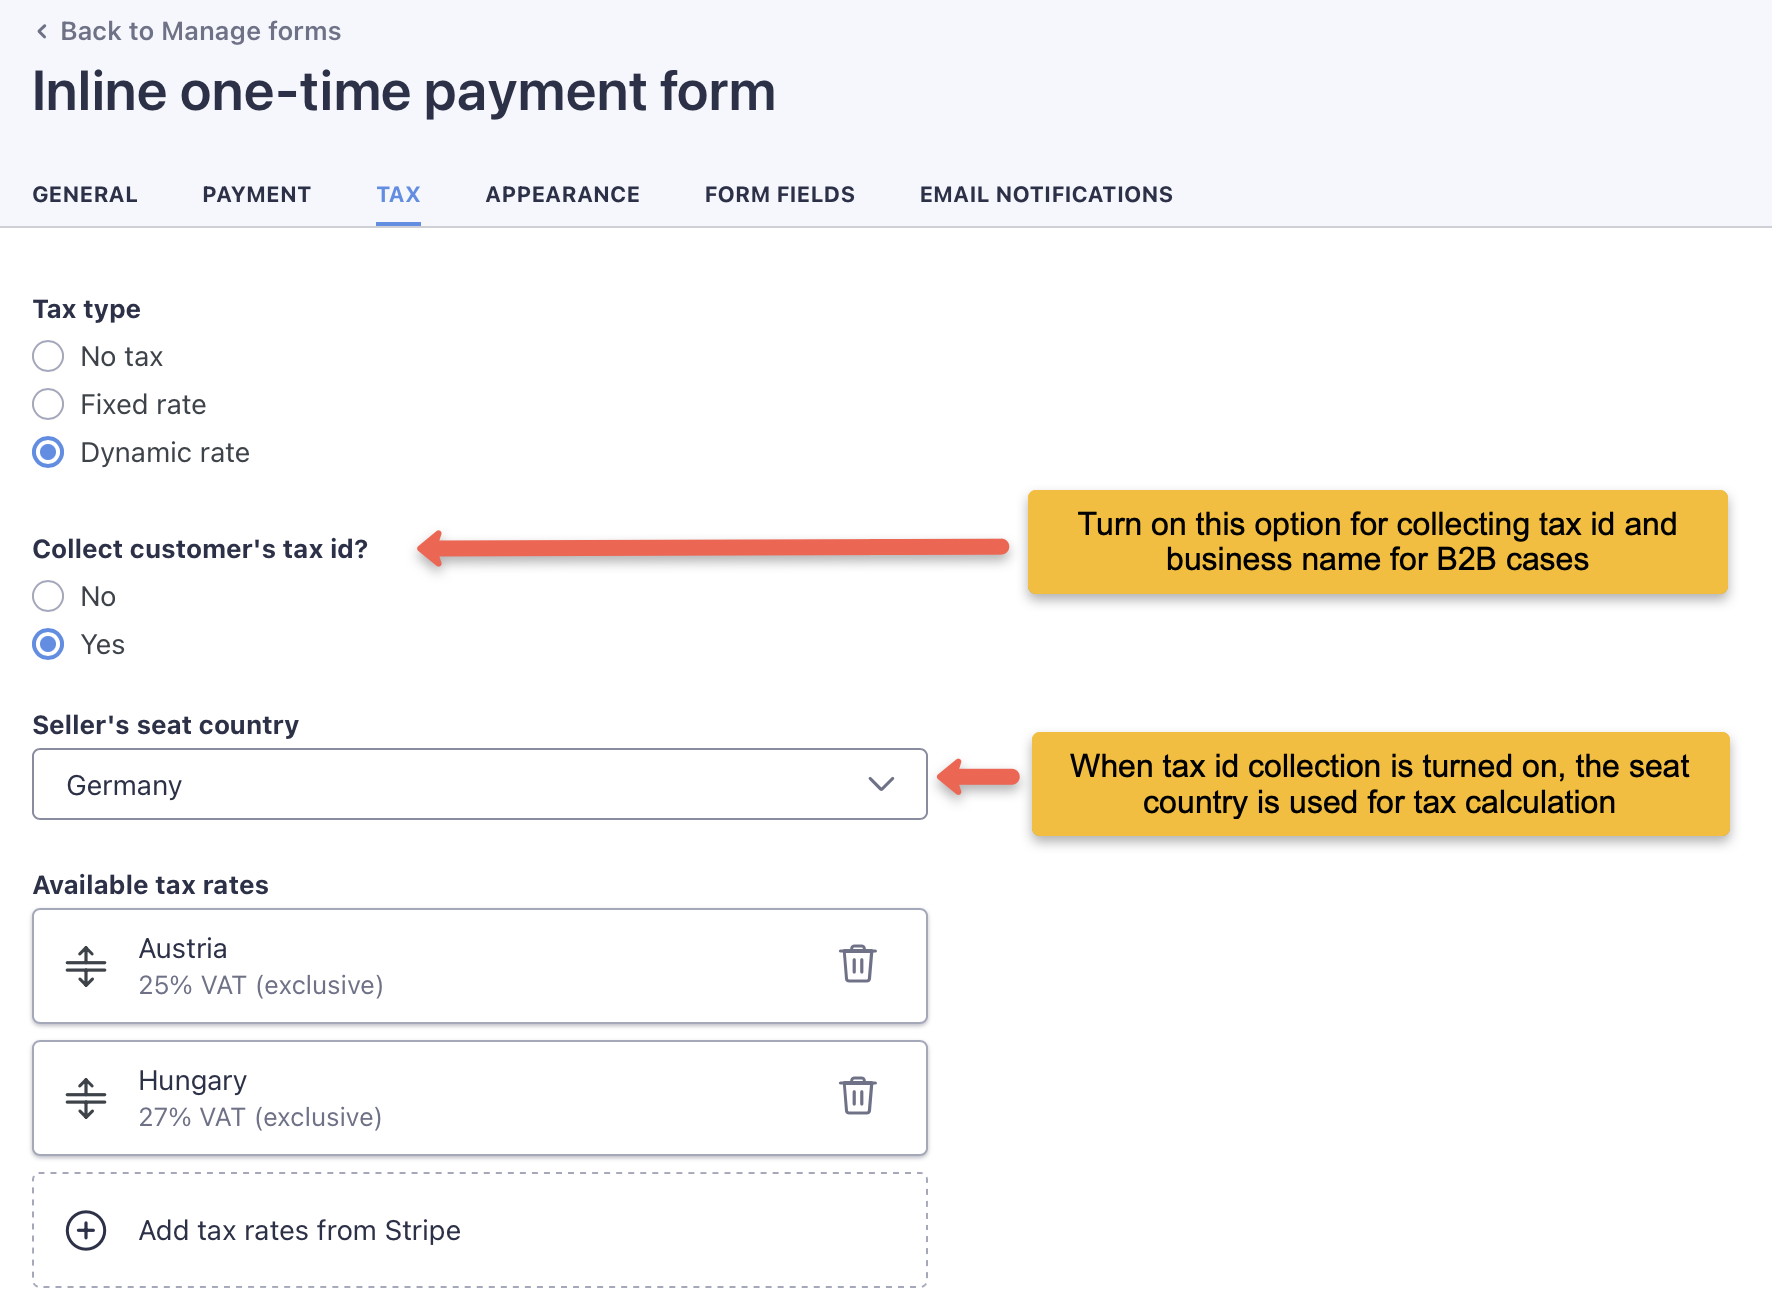 For B2B sales, turn on the 'Collect the customers's tax id' option on the 'Tax' tab